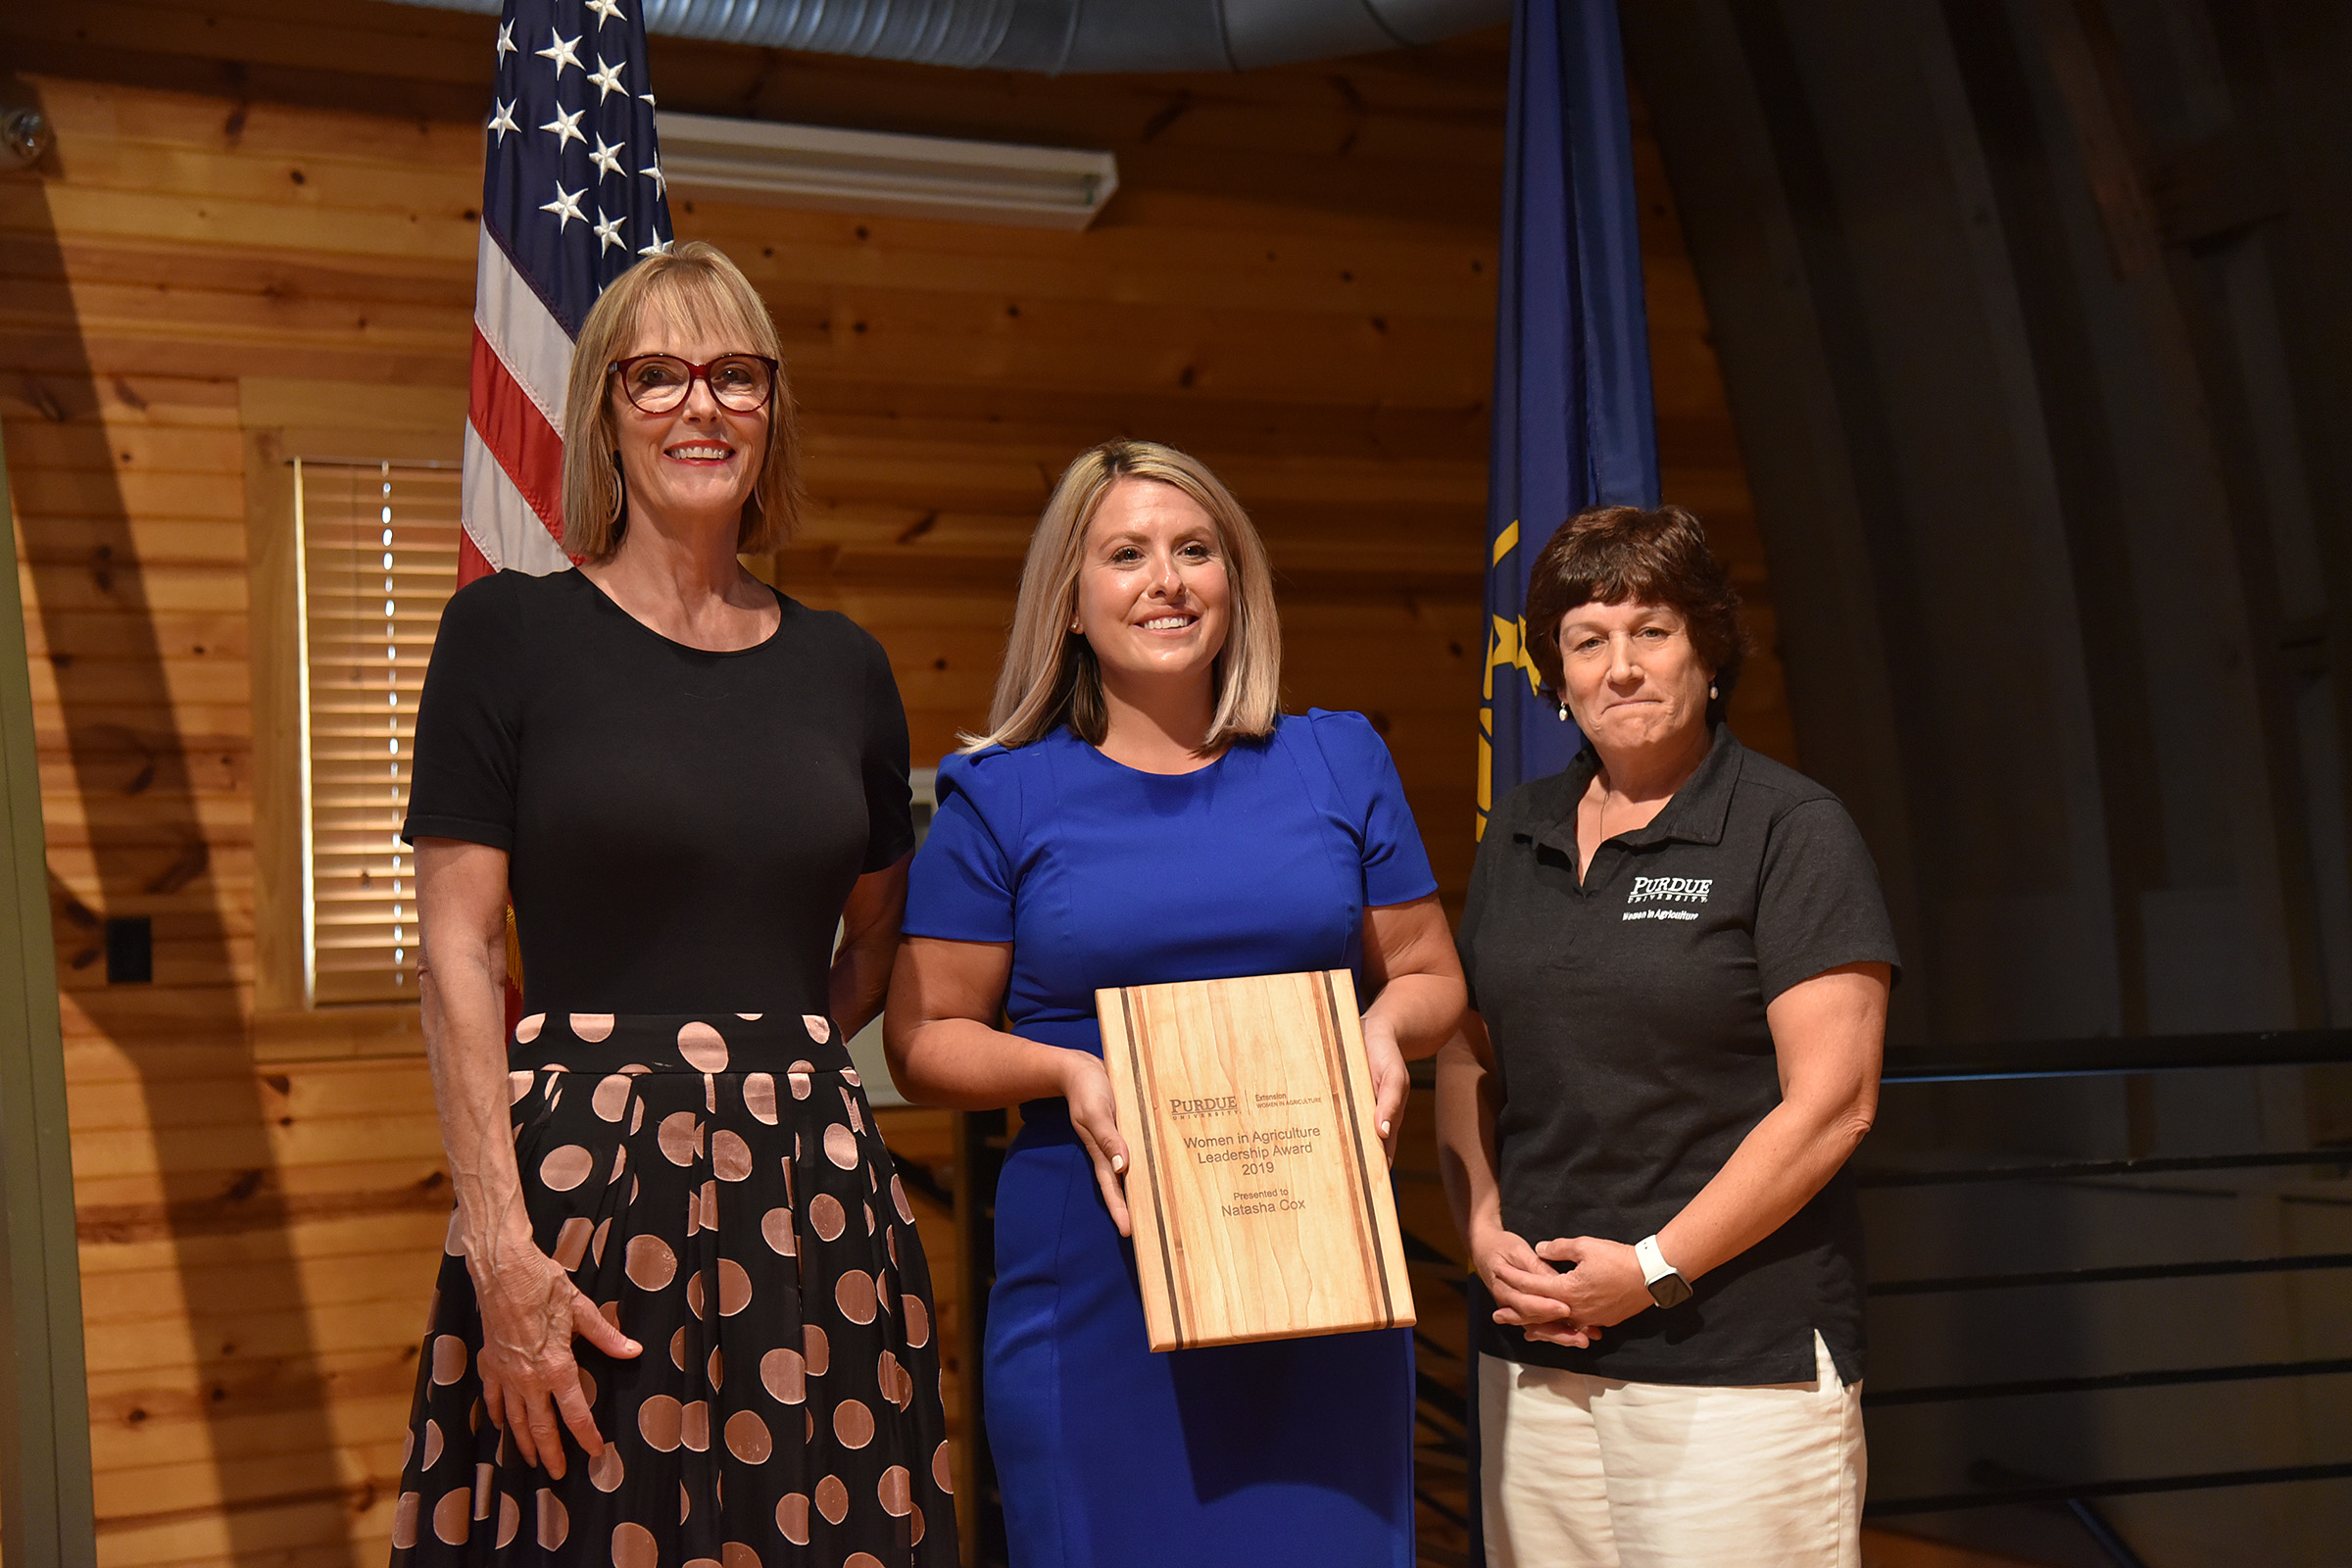 Suzanne Crouch, Natasha Cox and Karen Plut with the Women in Agriculture Award